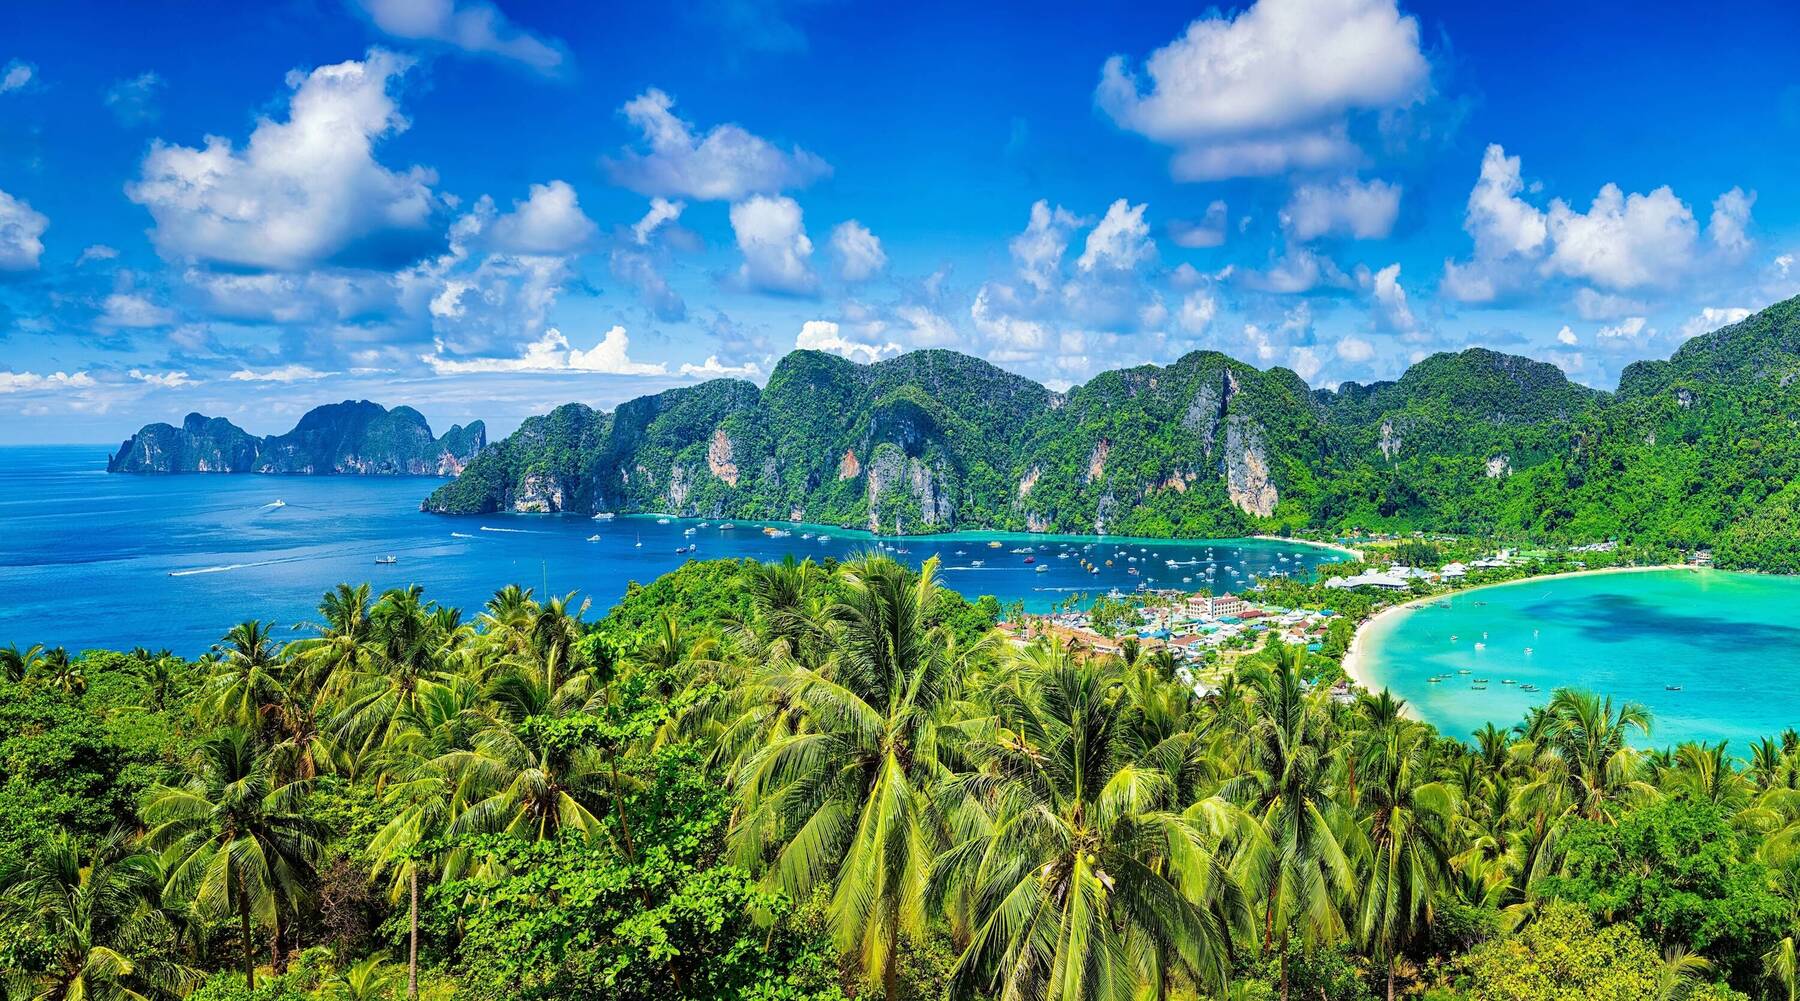 Thai Island Guide: Where to go for what you want